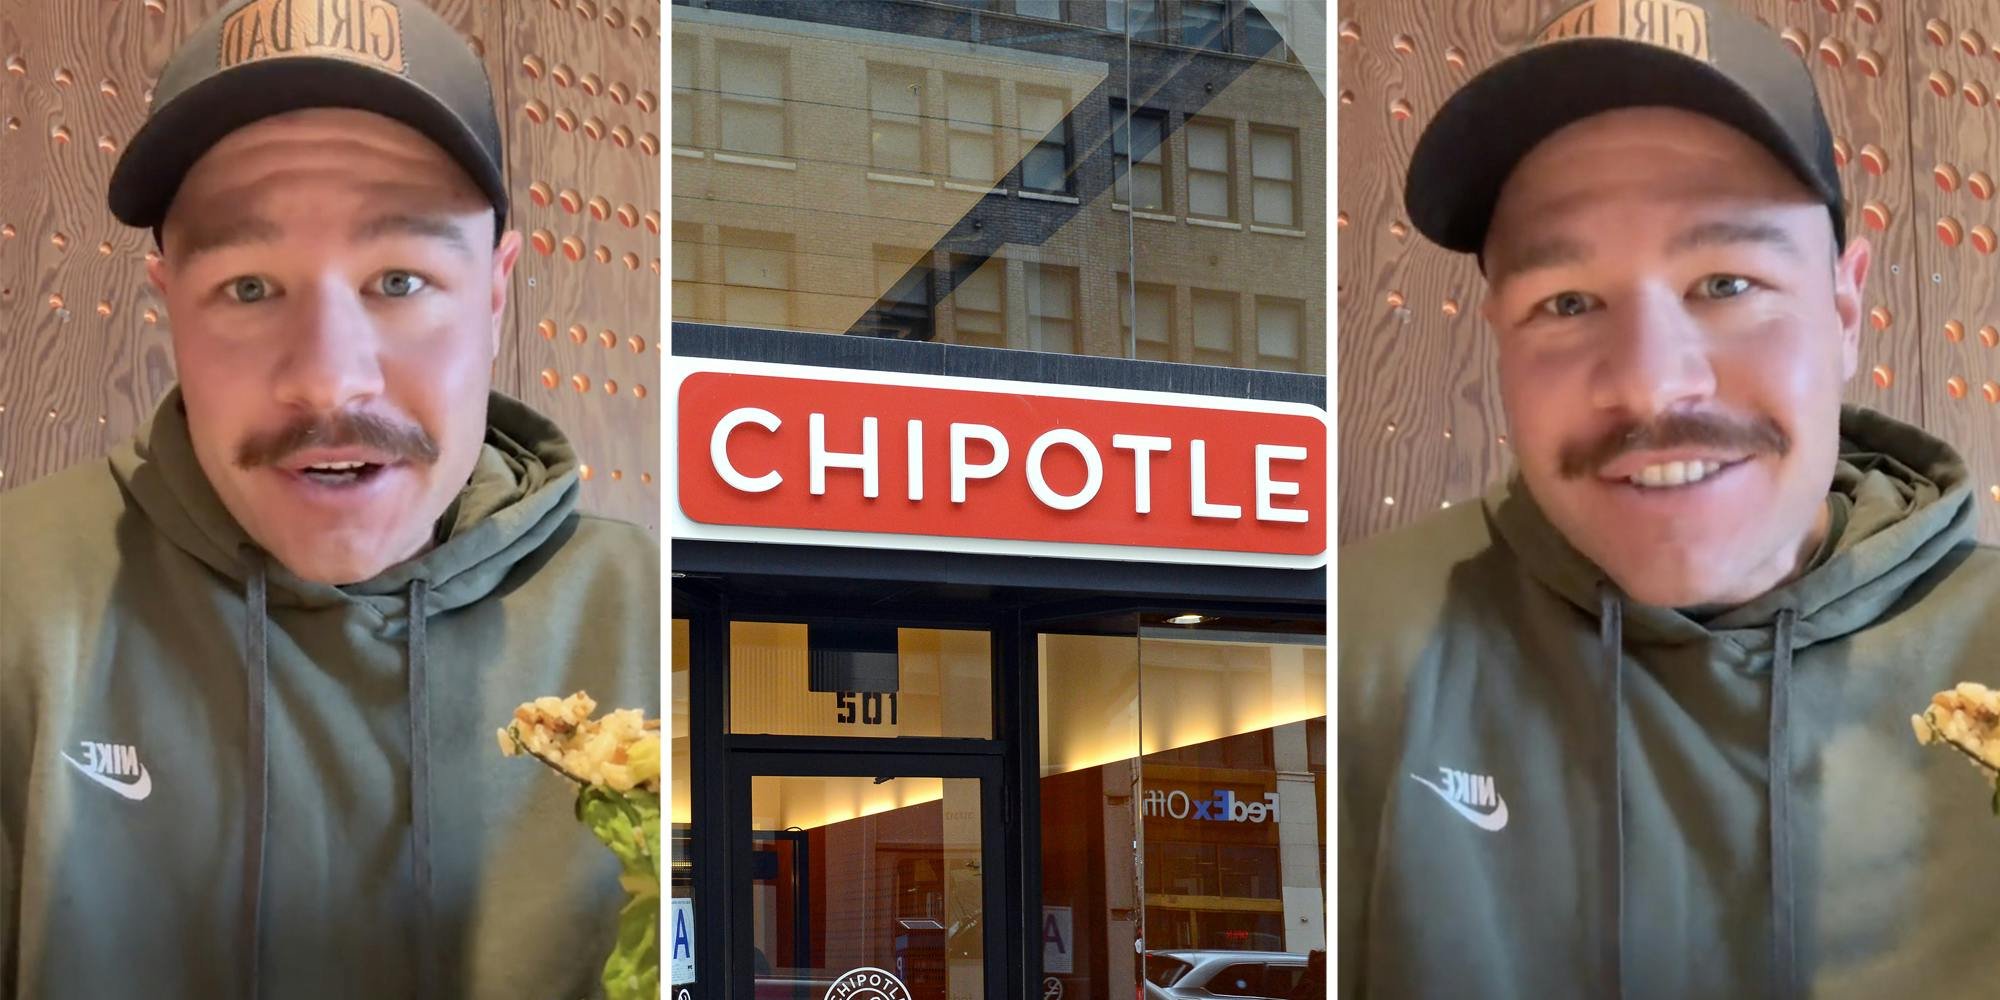 Customer who eats Chipotle ‘every single day’ confronts a worker who ‘doesn’t like’ him. It backfires